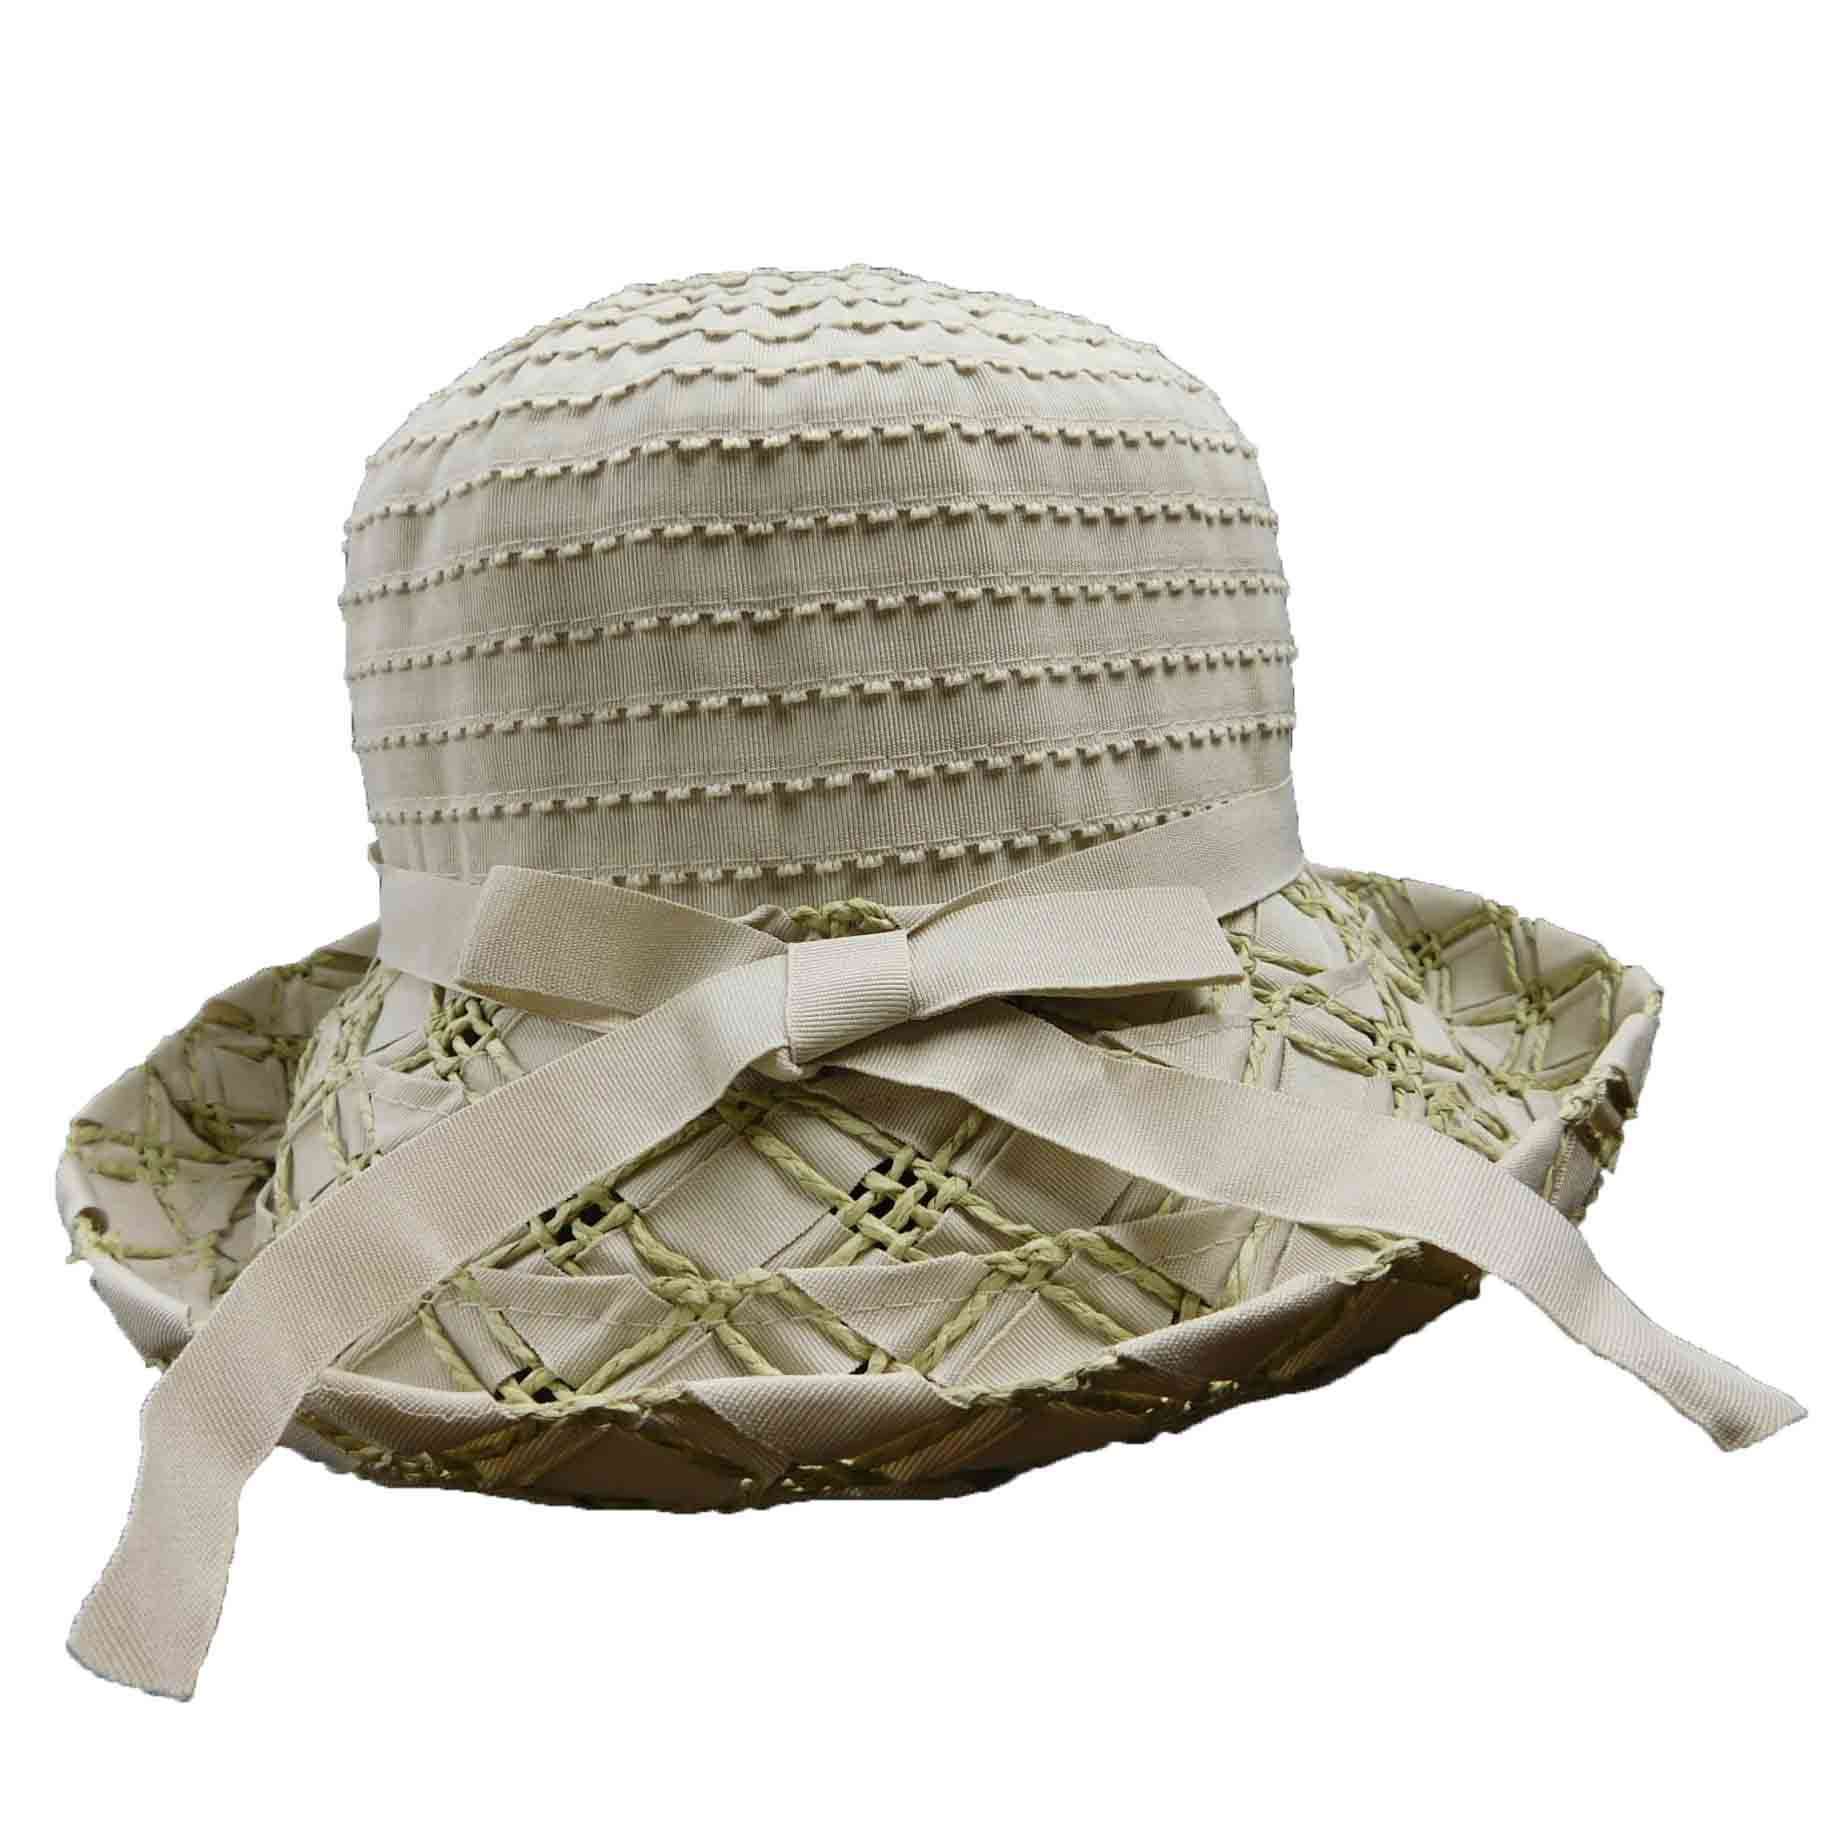 Ribbon Hat with Criss Cross Straw  Kettle Brim Kettle Brim Hat Jeanne Simmons WSRP579SG Sage  